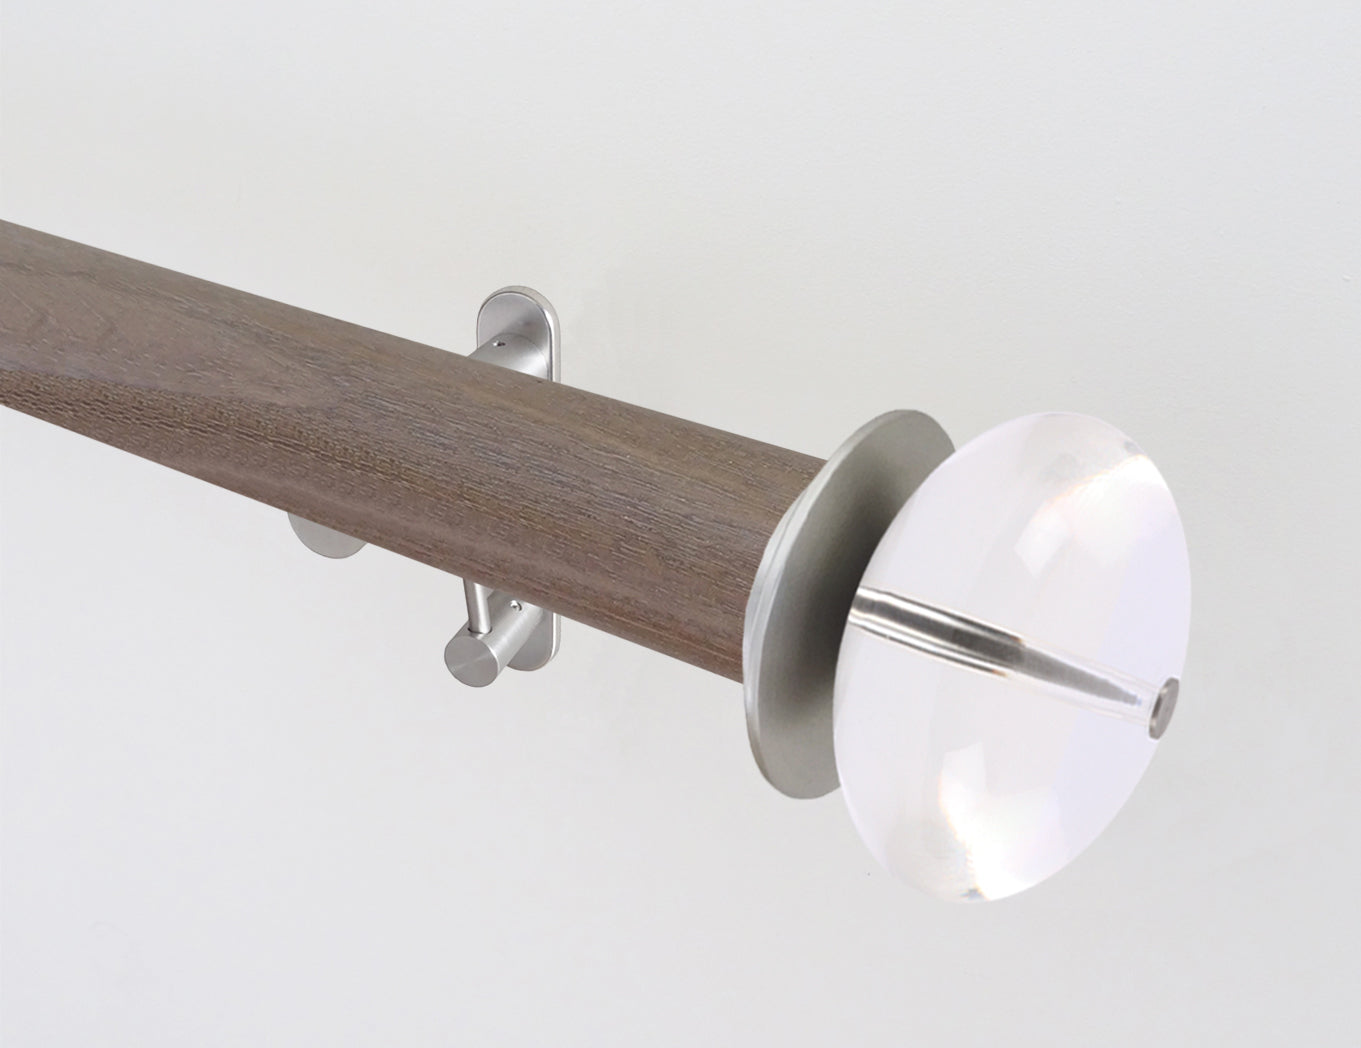 50mm dia. weathered oak stained wooden curtain pole with acrylic ball finials & brackets